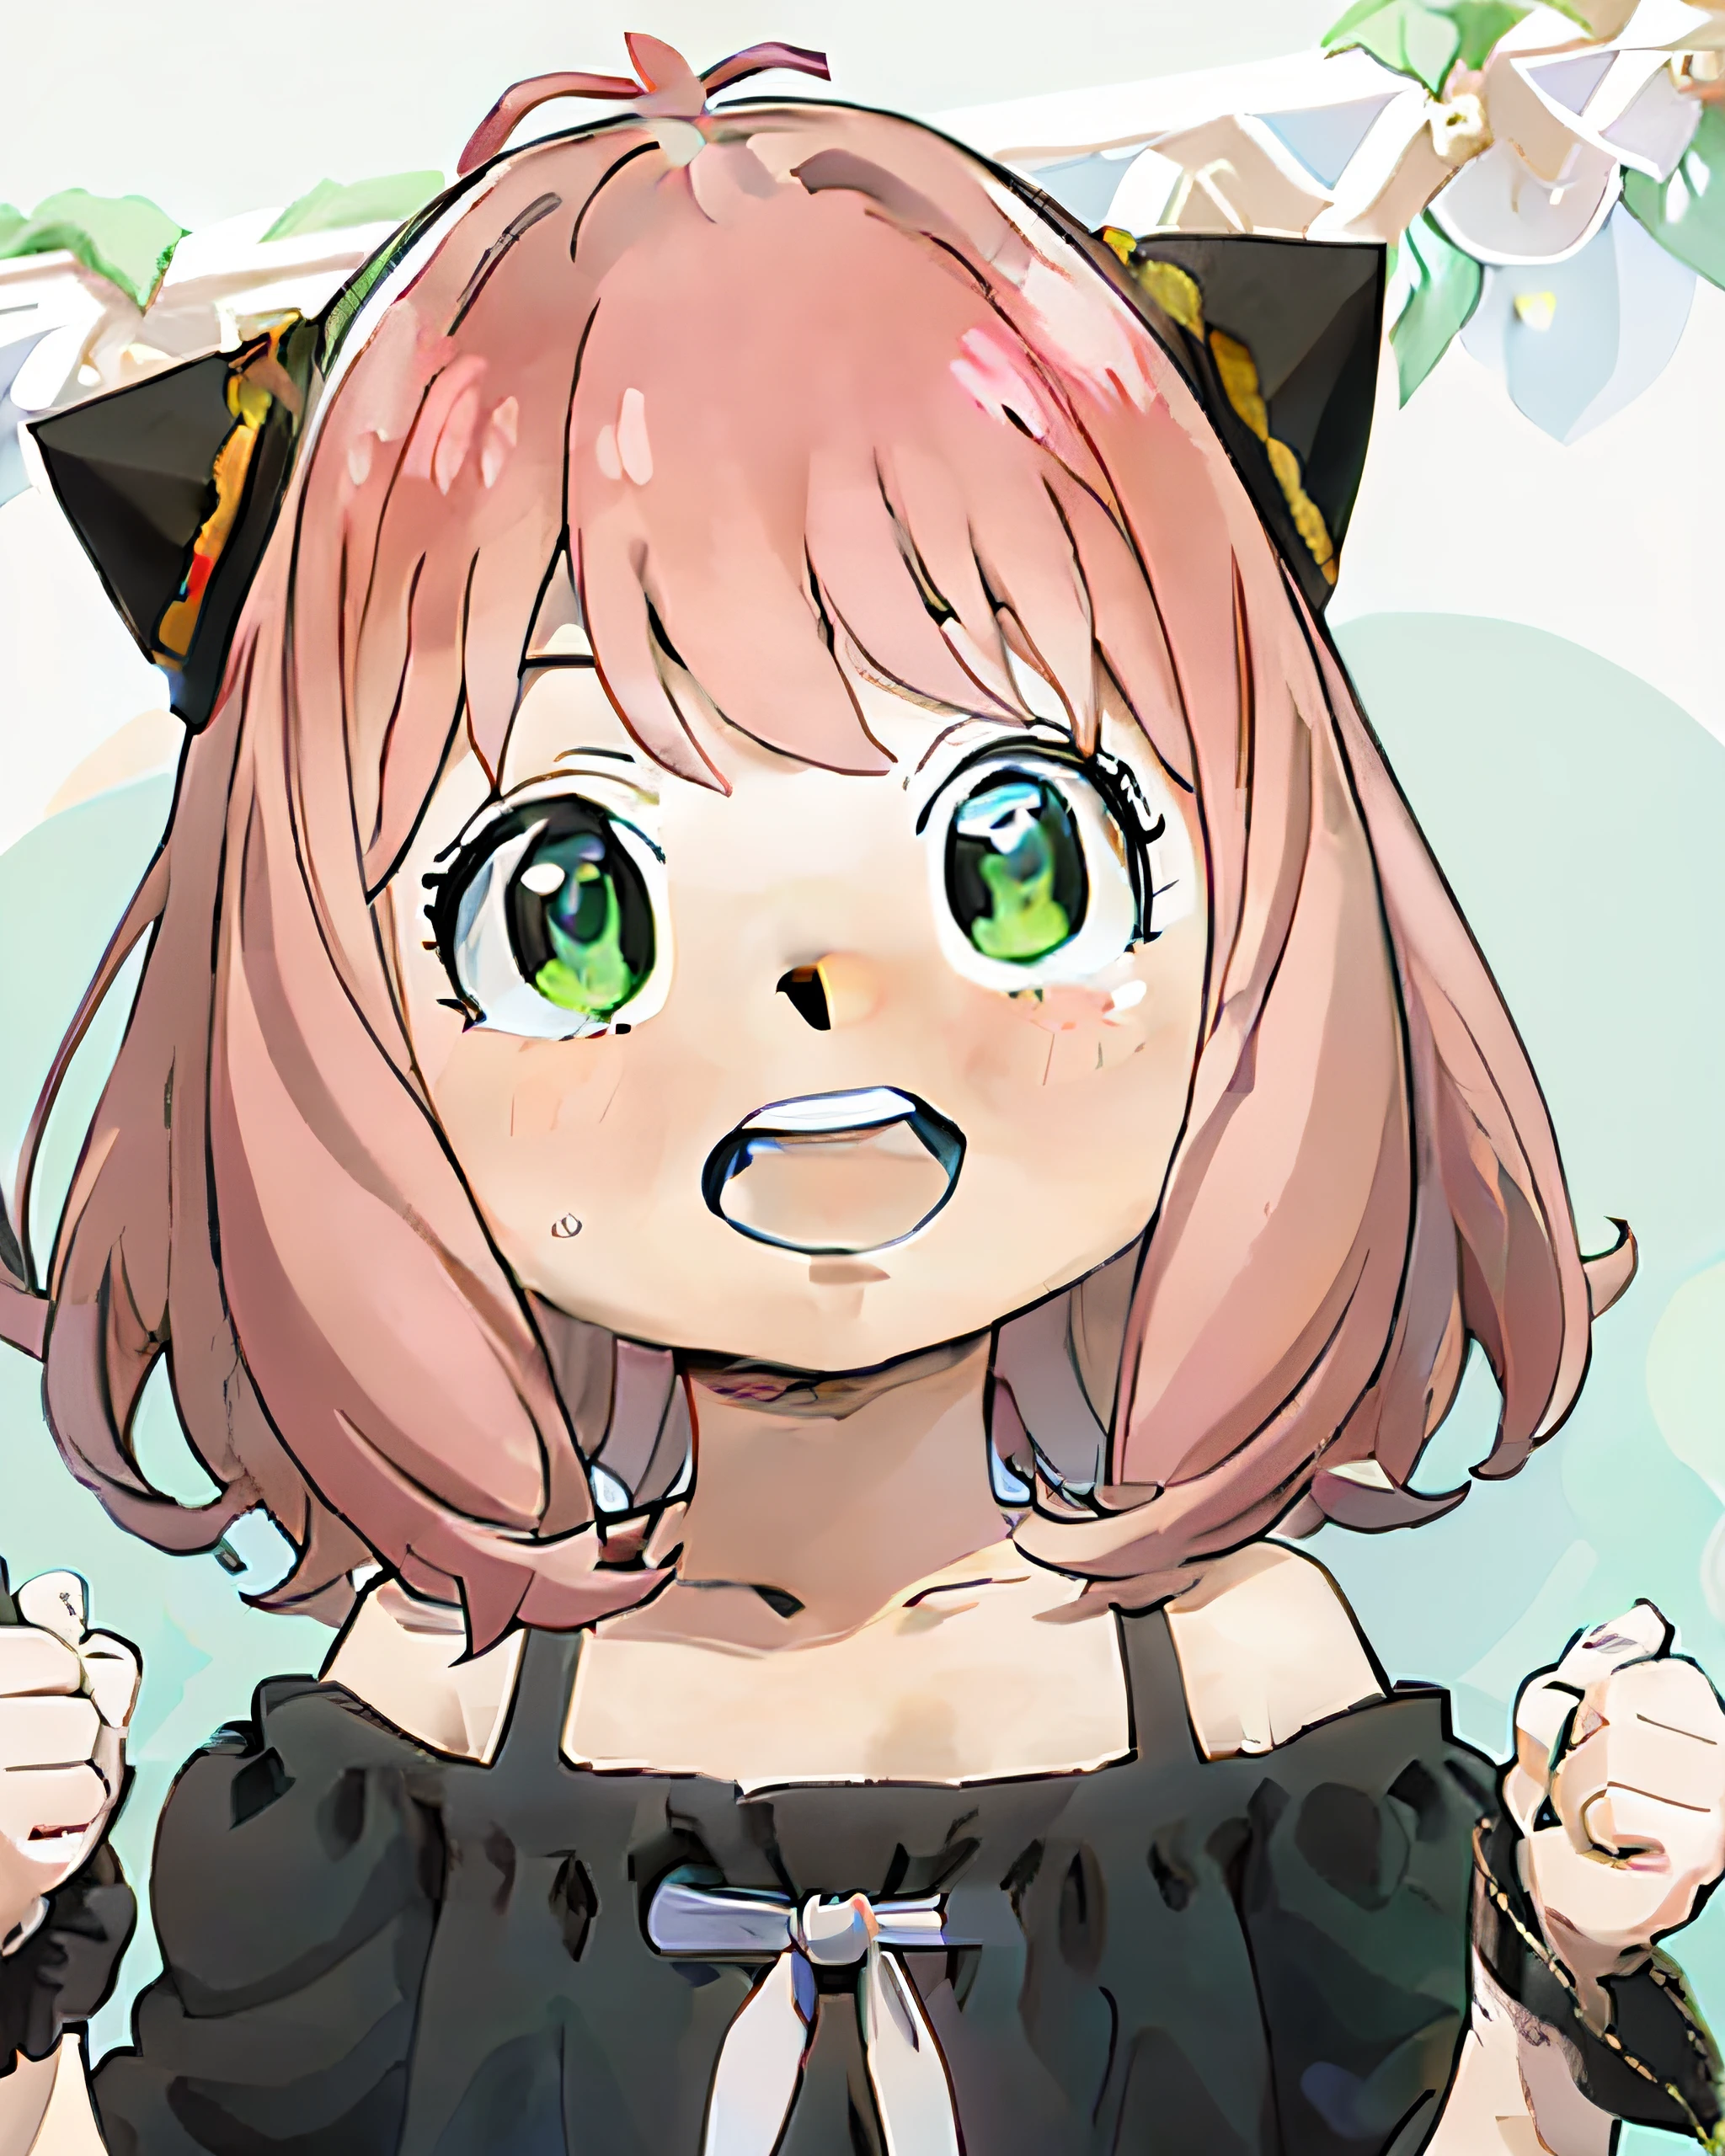 a anime girl with ผมสีชมพู anง ตาสีเขียว pointing at something with a surpriseง look on her face anง a black cat hat, (1สาว:0.992), (:ง:0.583), (เรียบ:0.701), (บลัชออน:0.584), (ตาสีเขียว:0.992), (มองไปที่ผู้ดู:0.711), (อ้าปาก:0.760), (ผมสีชมพู:0.917), (ริบบิ้น:0.826), (ผมสั้น:0.571), (รอยยิ้ม:0.855), (ตามลำพัง:0.949), (ฟัน:0.770), (upper boงy:0.760)